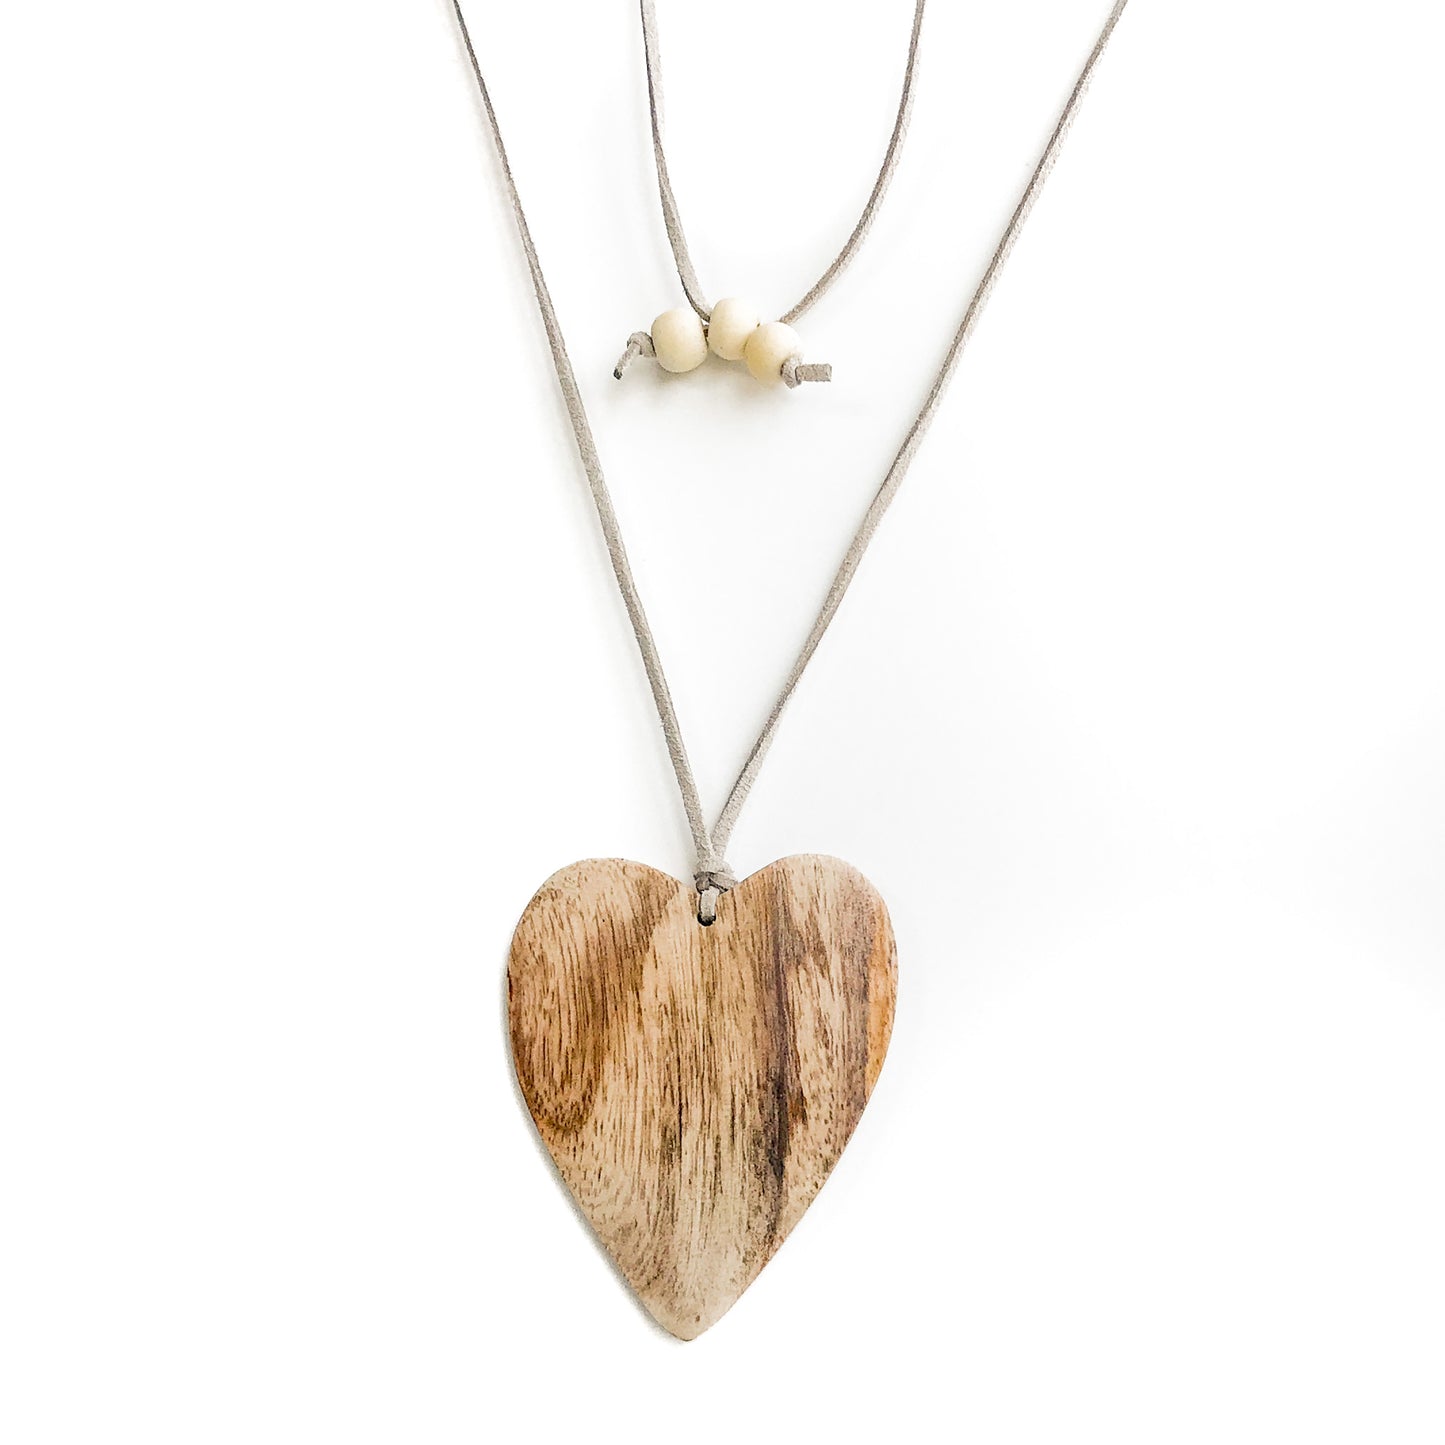 Simple Wooden Heart Necklace